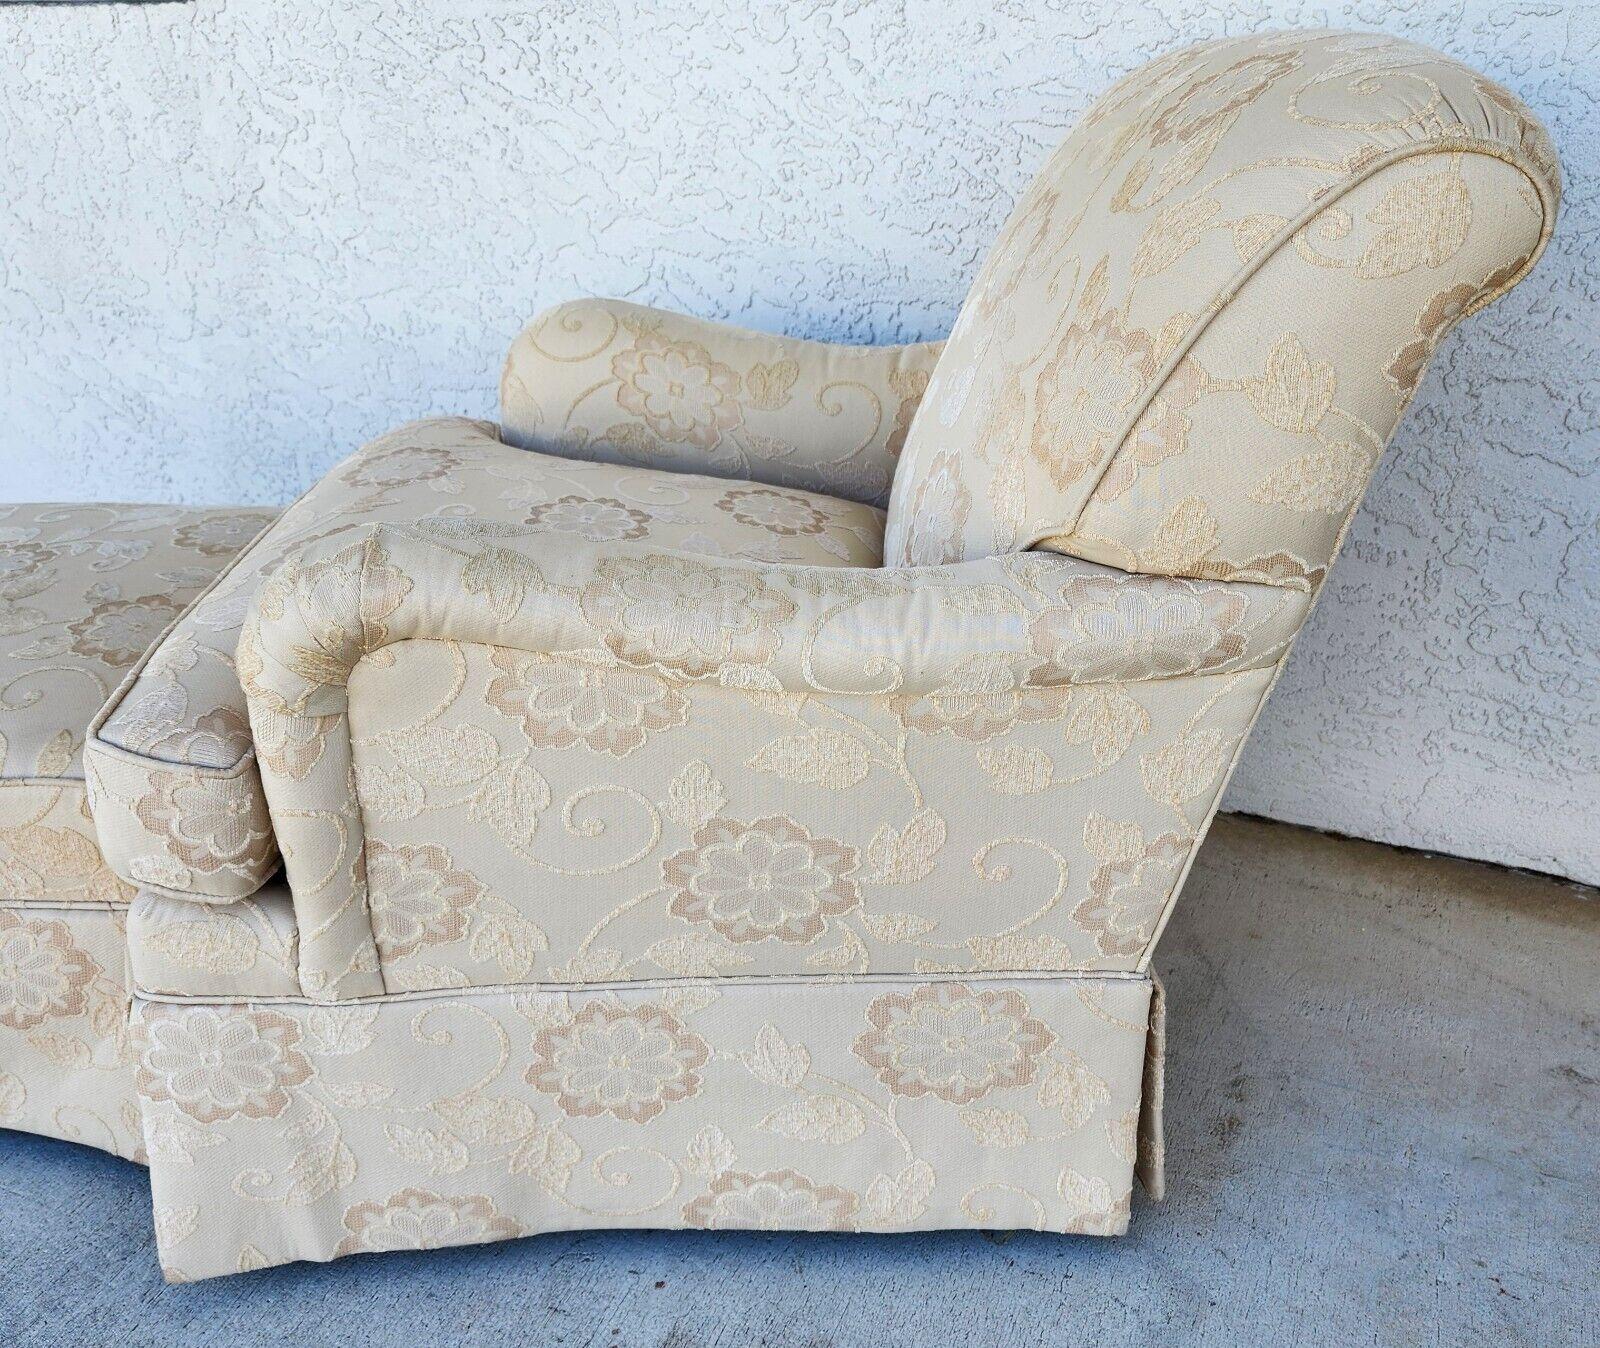 Offering One Of Our Recent Palm Beach Estate Fine Furniture Acquisitions Of A
English Style Lounge Armchair and Rolling Ottoman by Sherrill
Comes with rolling ottoman and 2 arm covers that were never used.

Approximate Measurements in